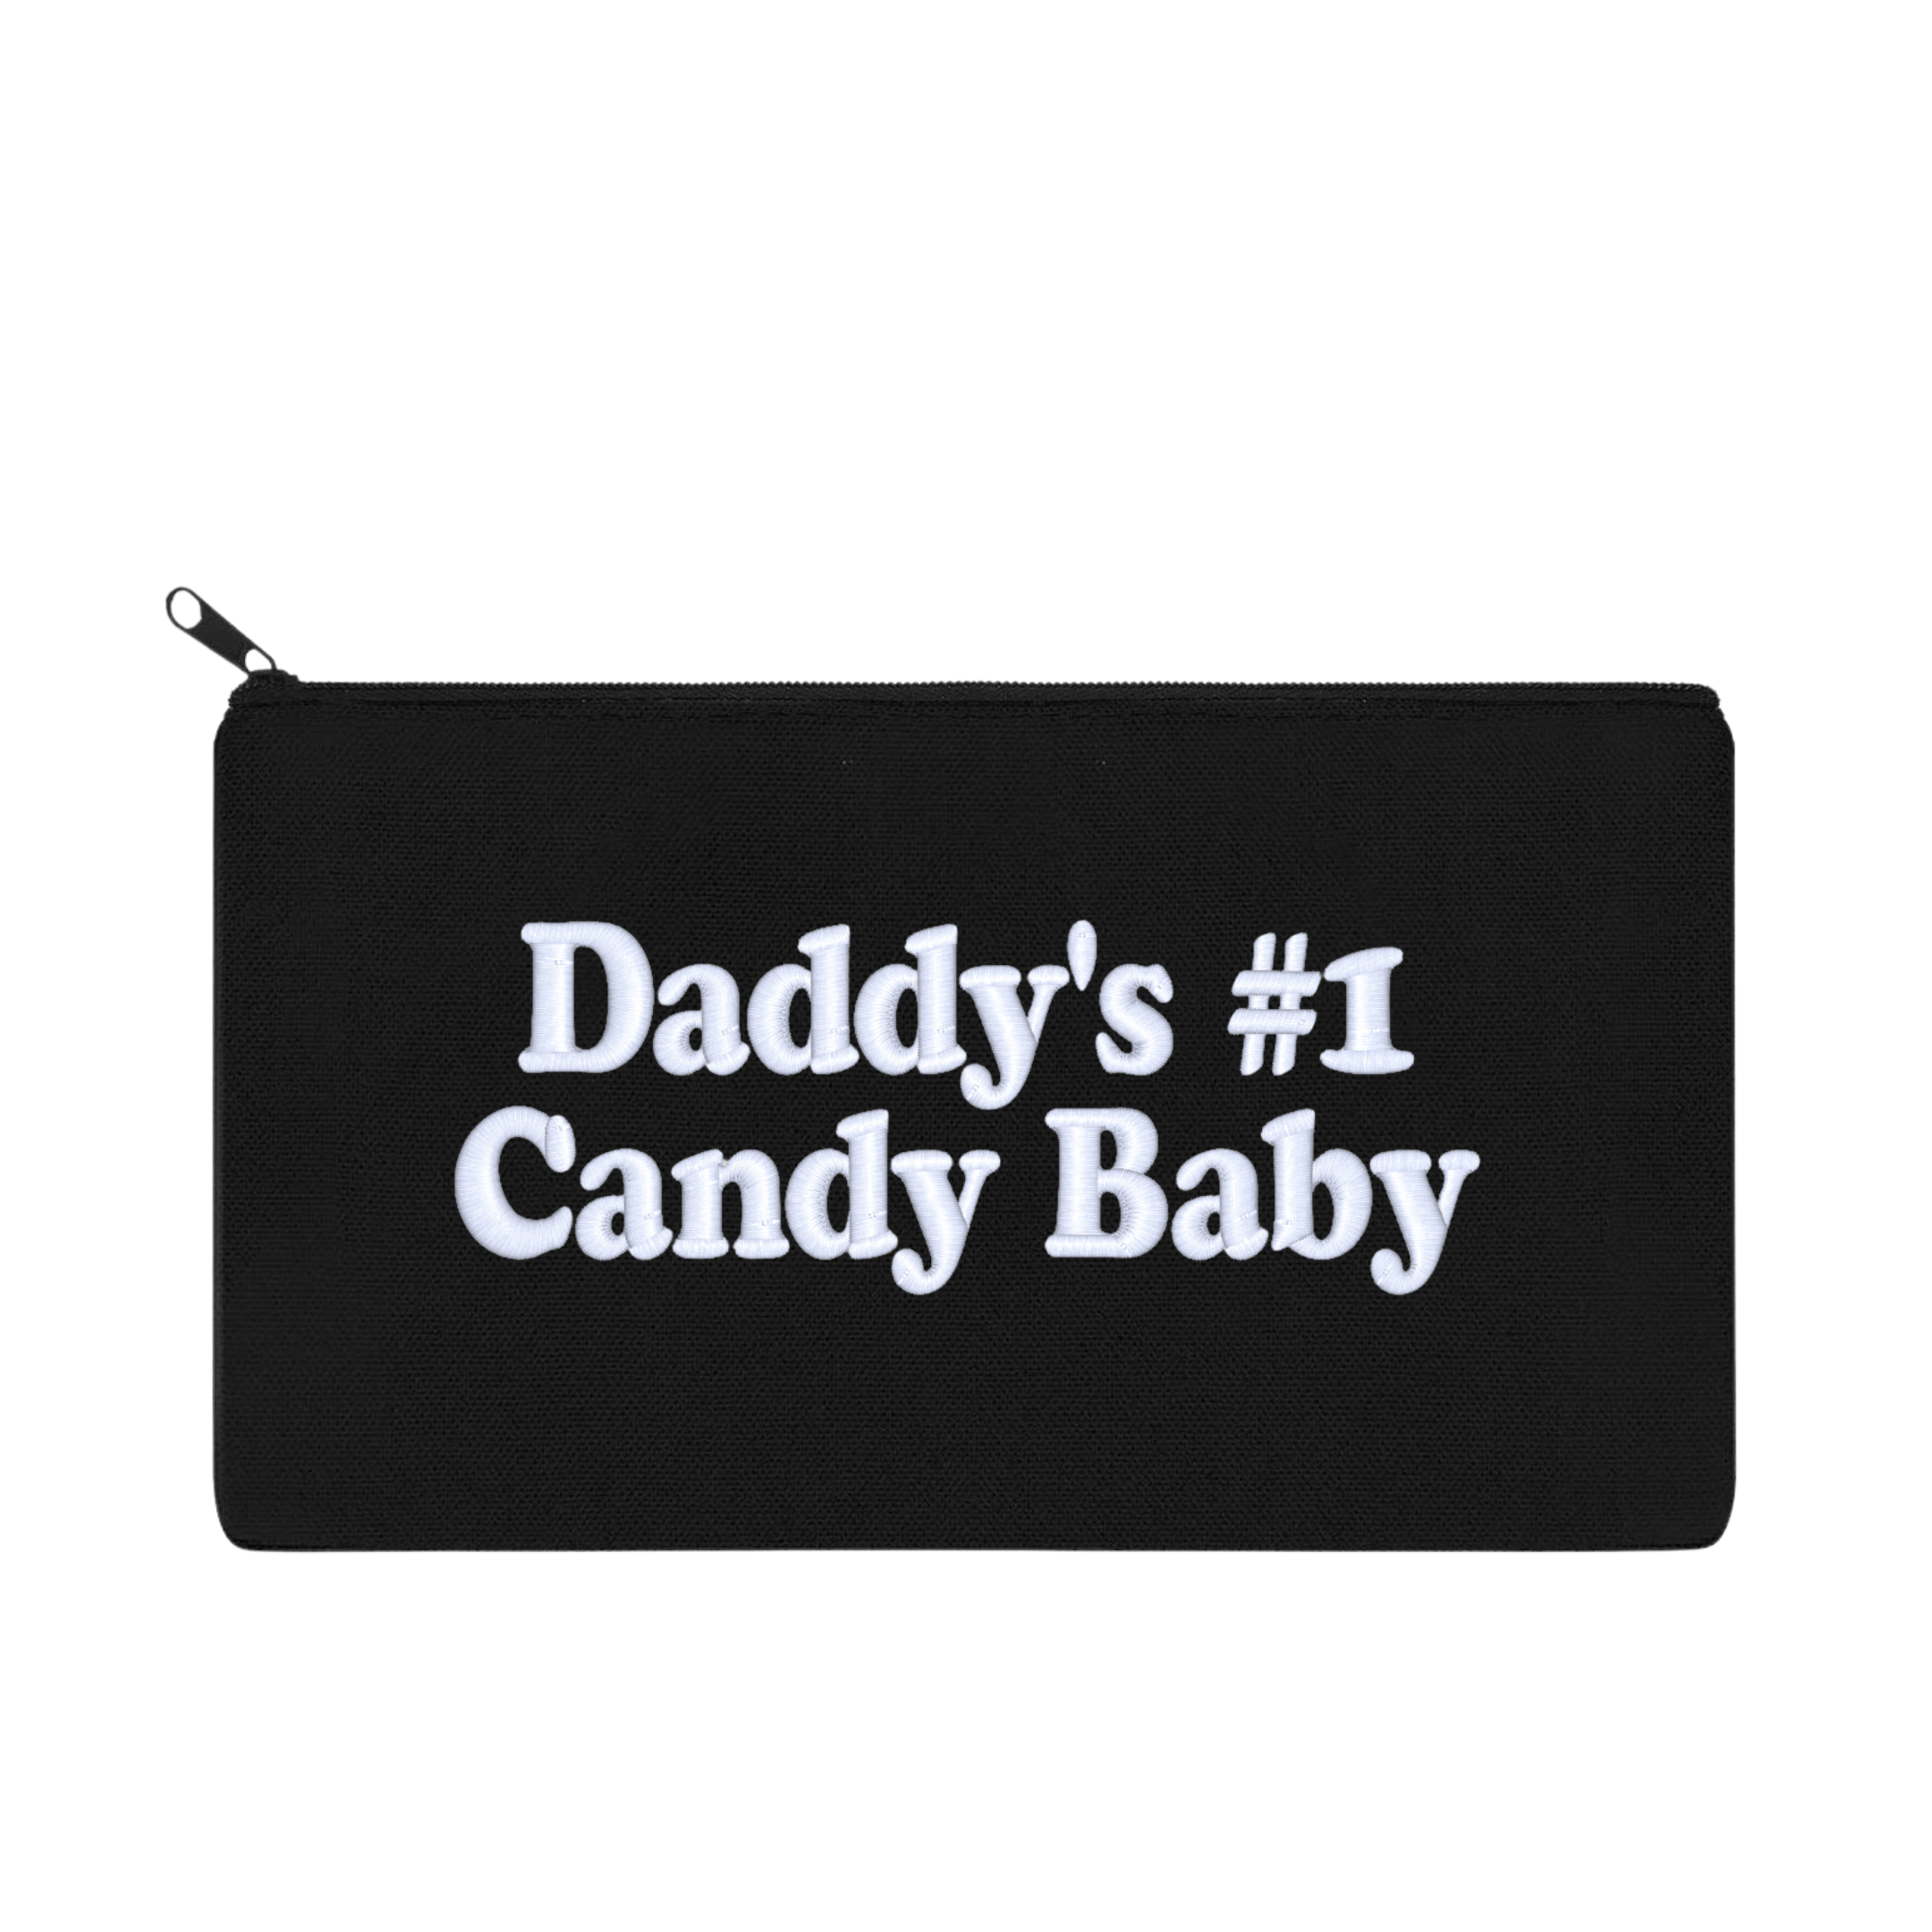 Daddy's #1 Candy Baby Embroidered Multipurpose Zipper Pouch Bag